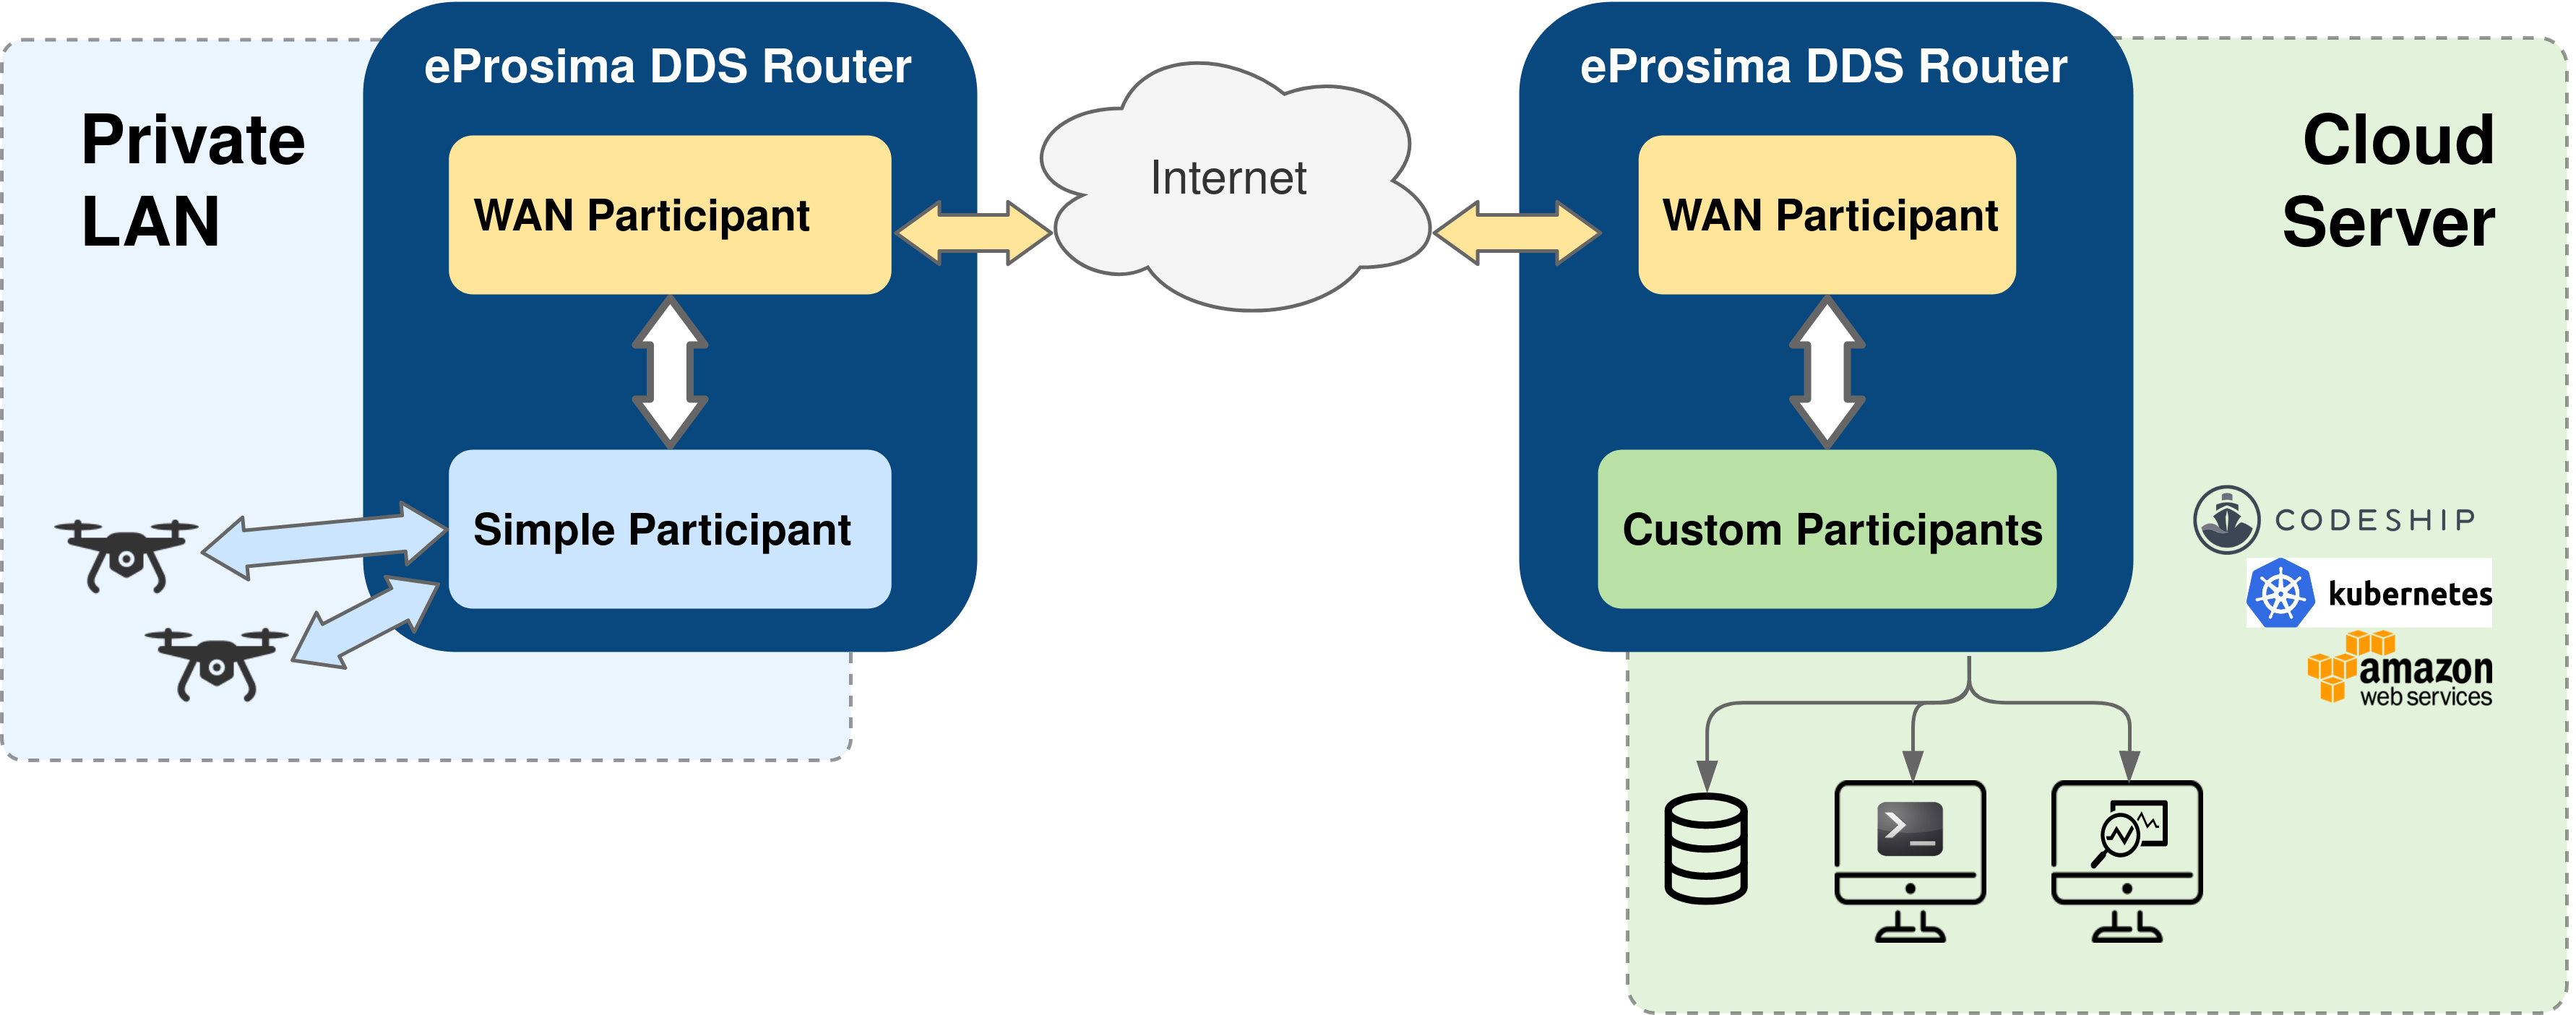 ../../../../_images/ddsrouter_overview_wan.png